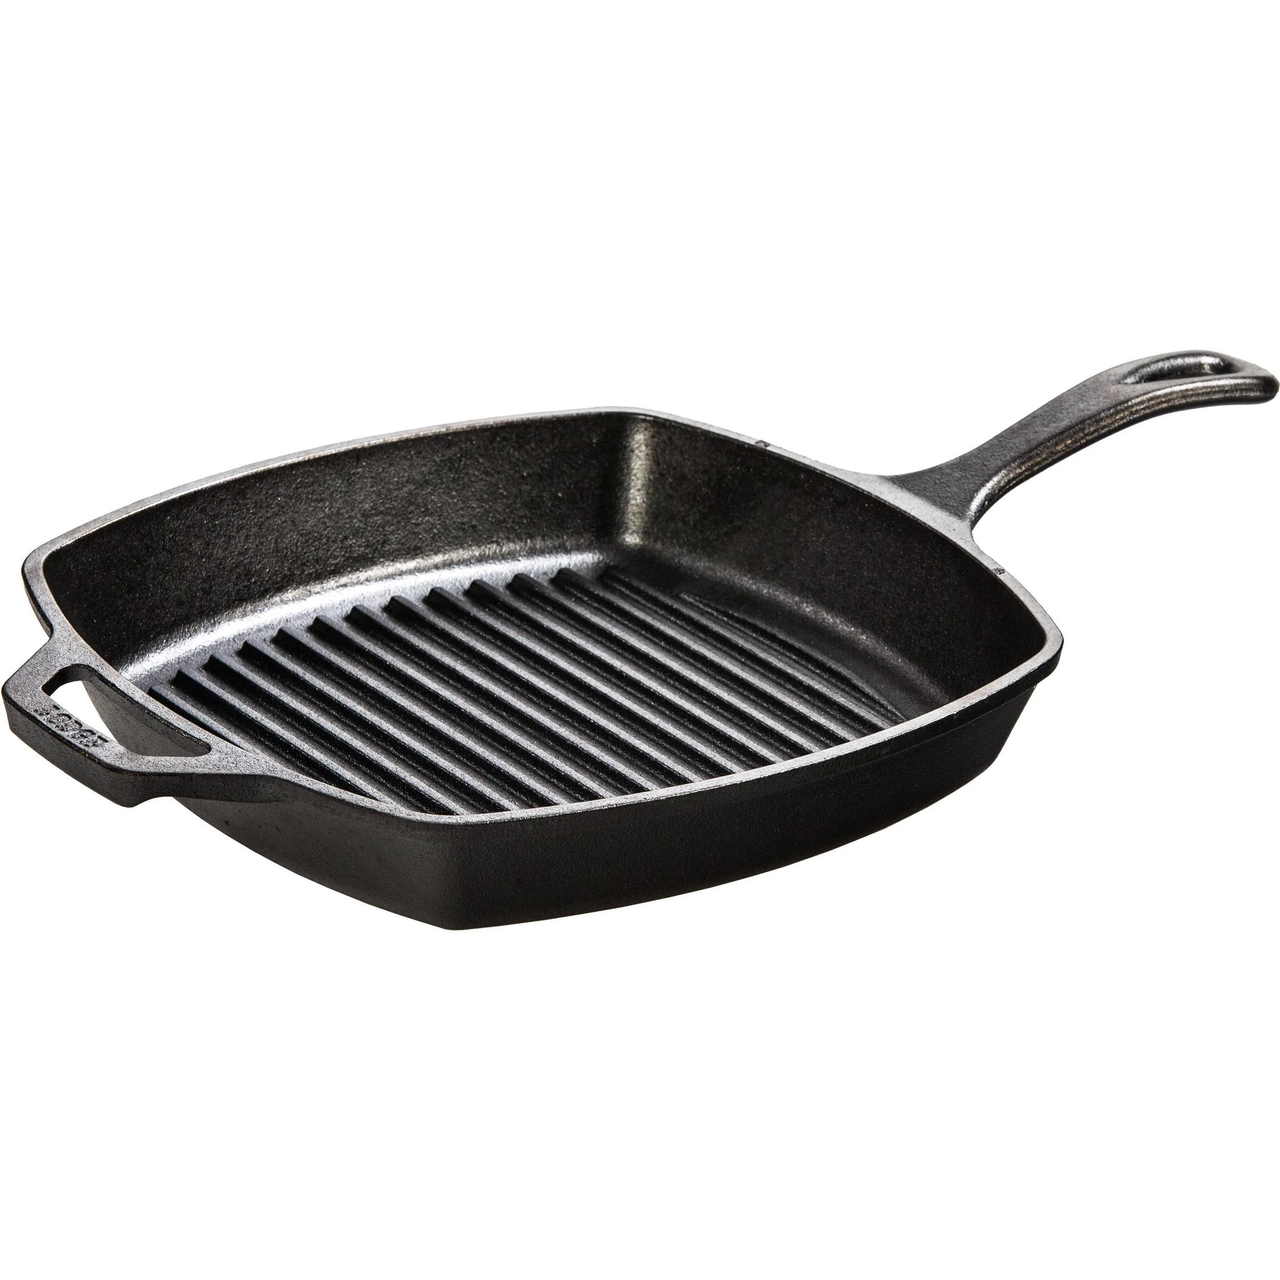 Lodge - 10.5 Inch Square Cast Iron Grill Pan